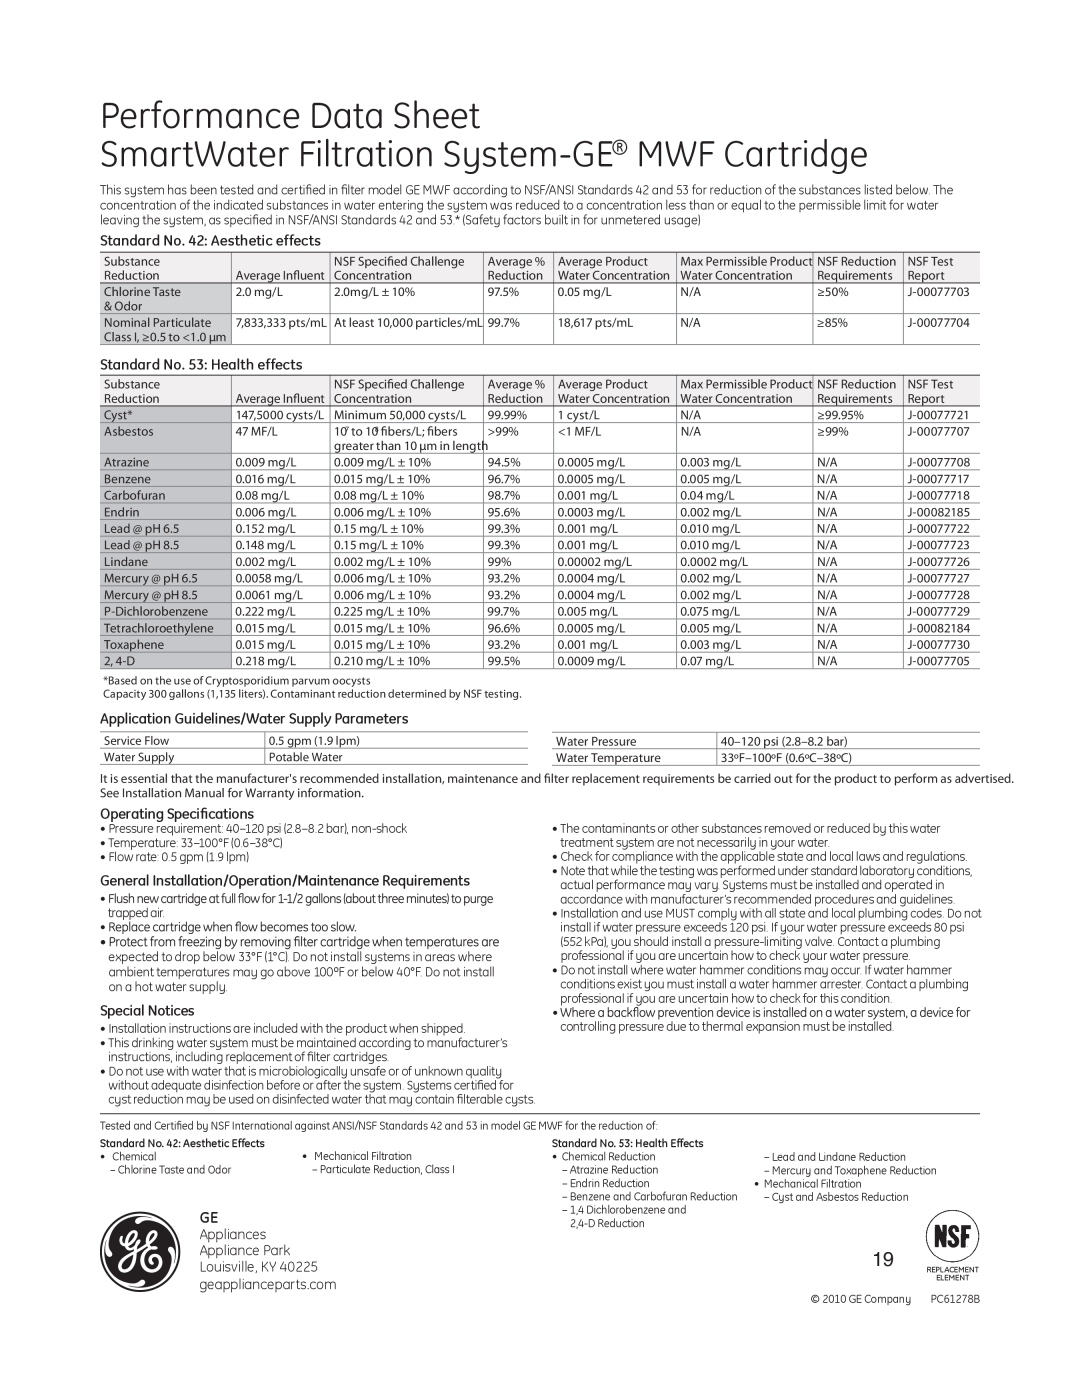 GE ED5KVEXVQ Performance Data Sheet, SmartWater Filtration System-GE MWF Cartridge, Standard No. 42 Aesthetic effects 